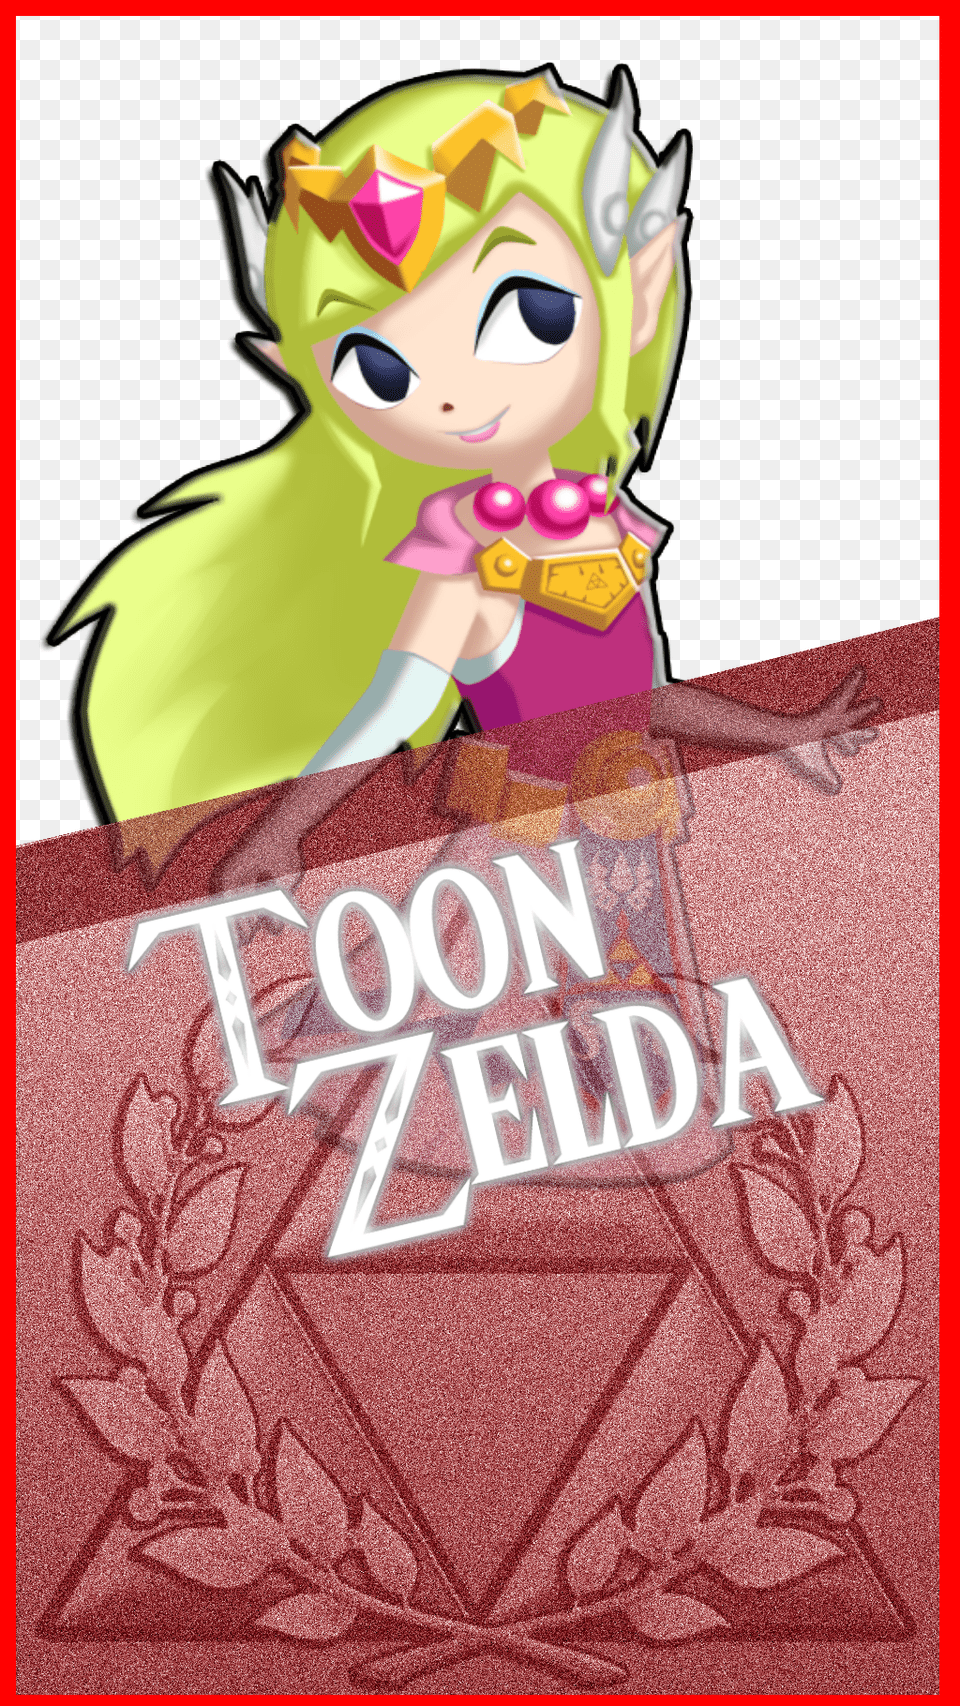 Toon Zelda Zzz The Legend Of Zelda, Publication, Book, Mail, Greeting Card Free Png Download